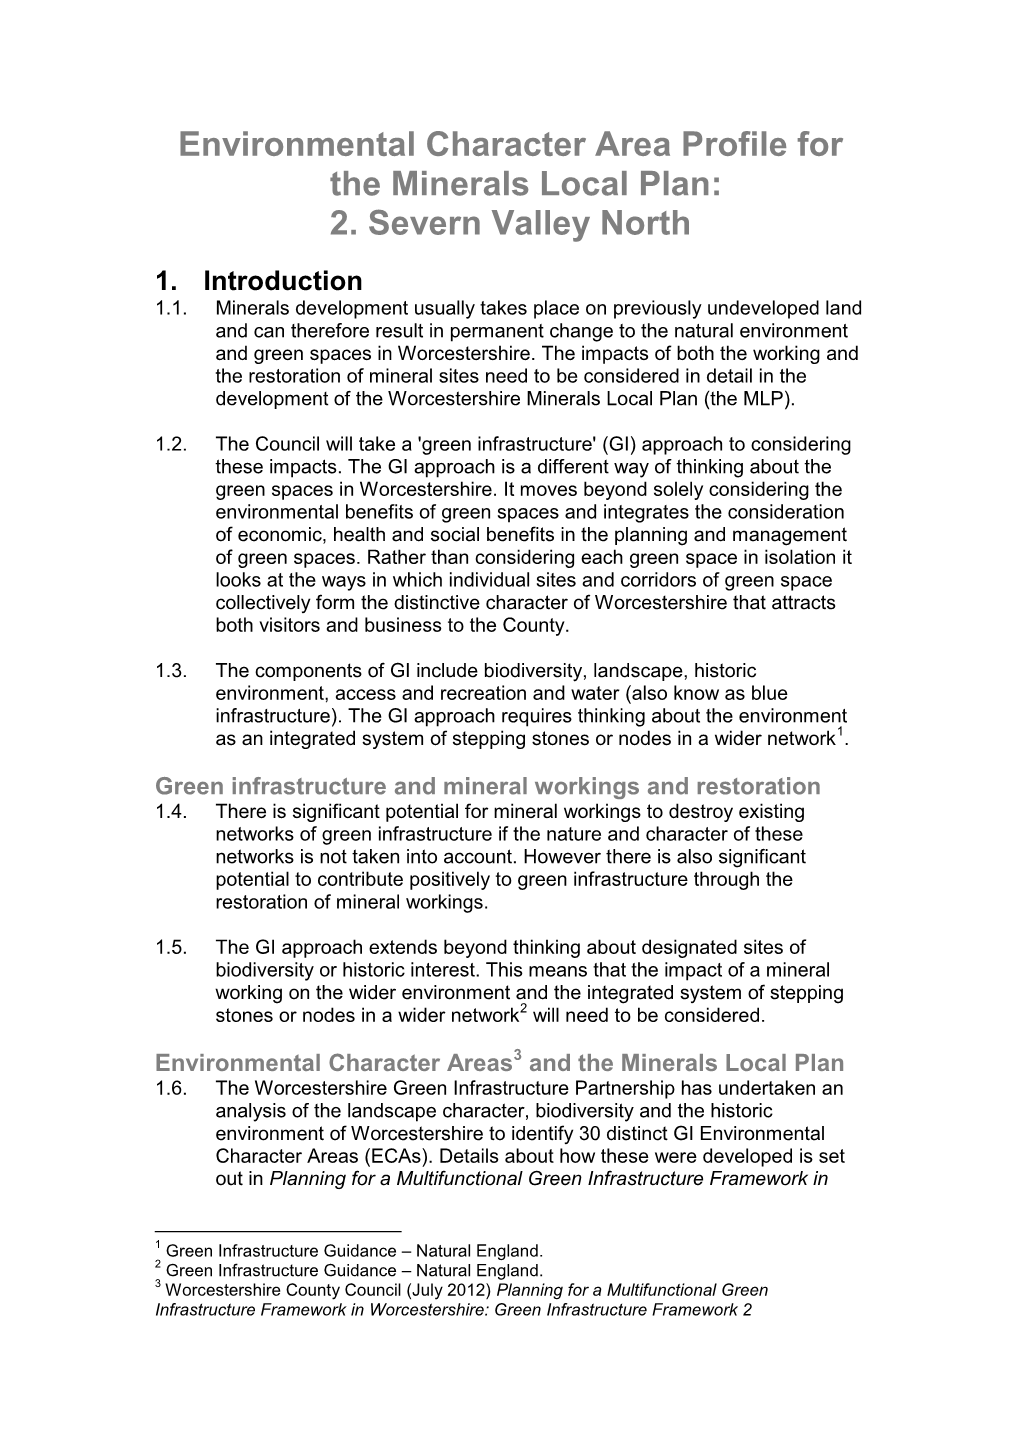 Environmental Character Area Profile for the Minerals Local Plan: 2. Severn Valley North